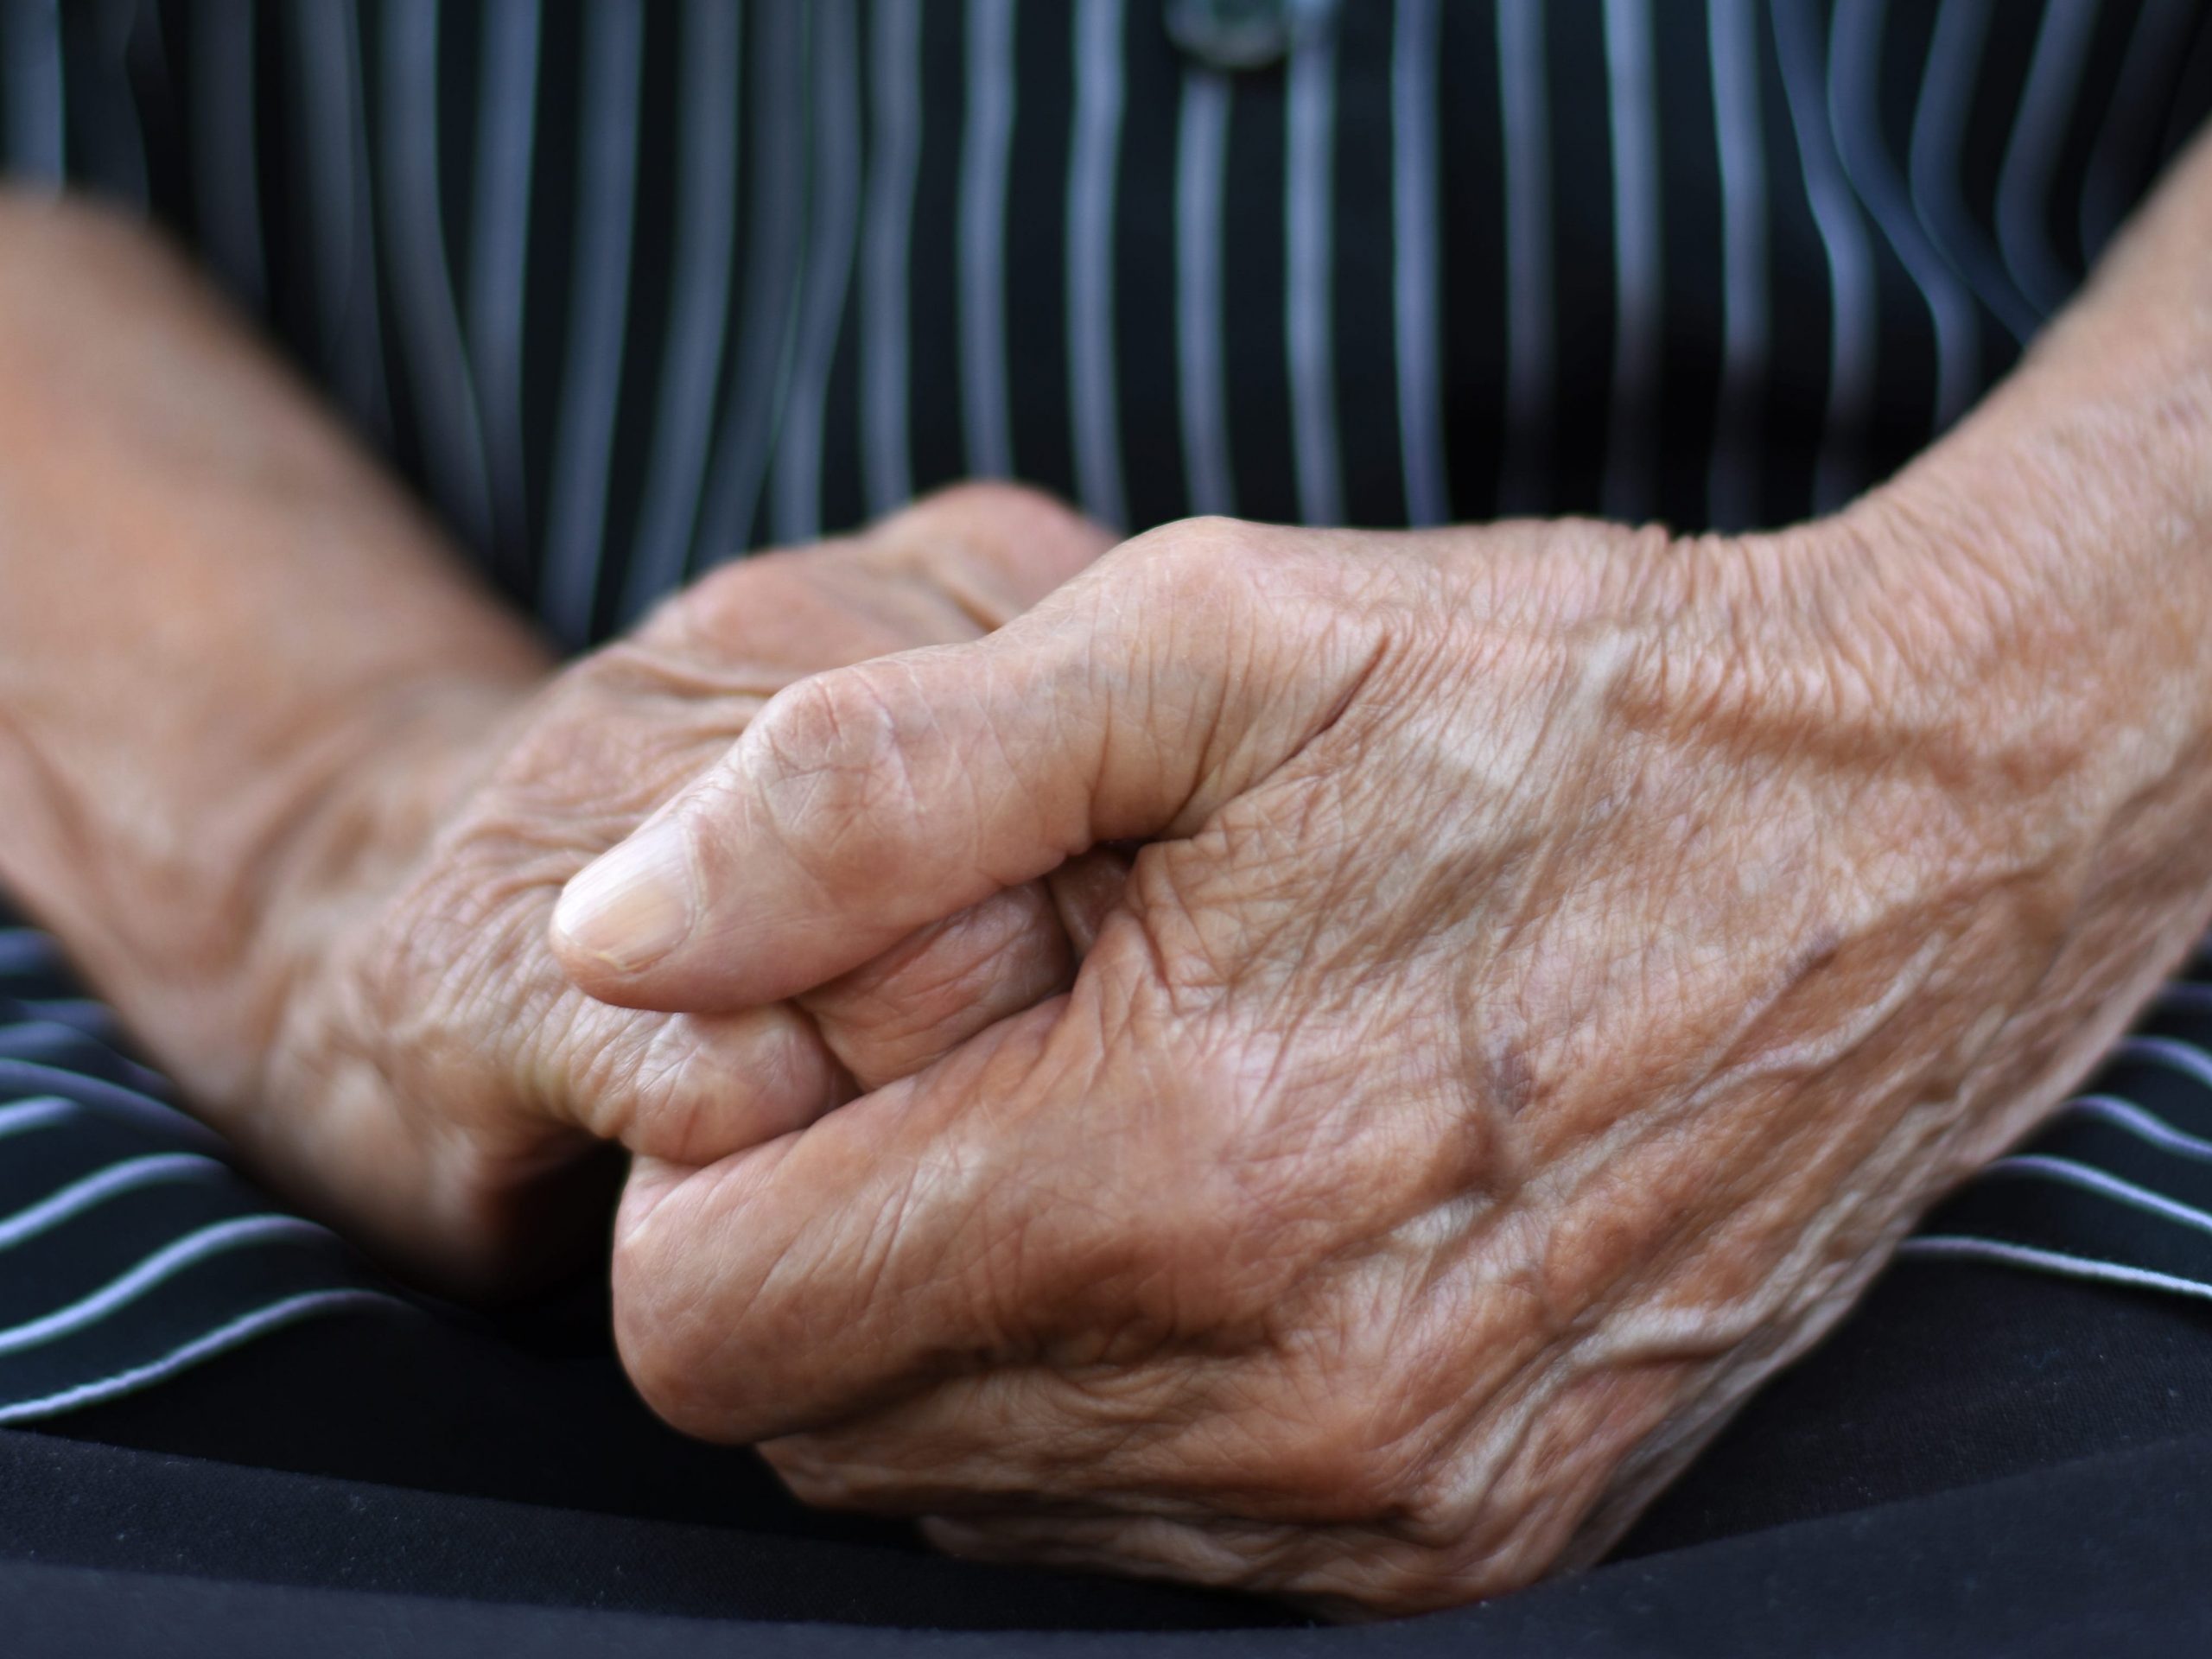 Stock image of the hands of an elderly woman.